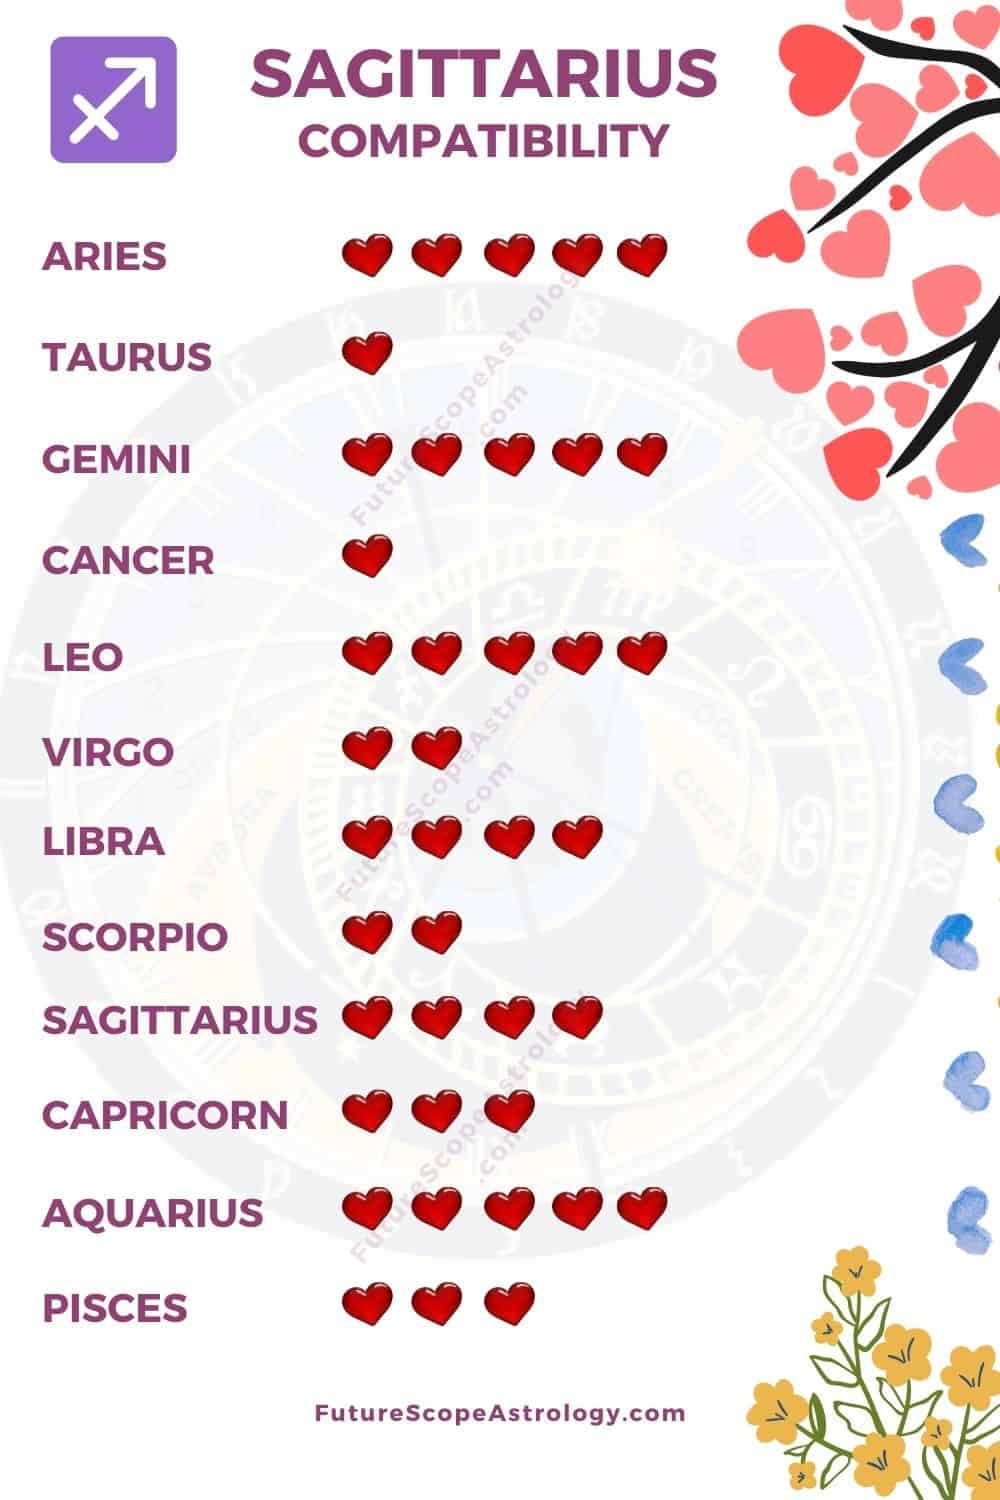 Sagittarius Compatibility Love Relationships All You Need To Know Futurescope